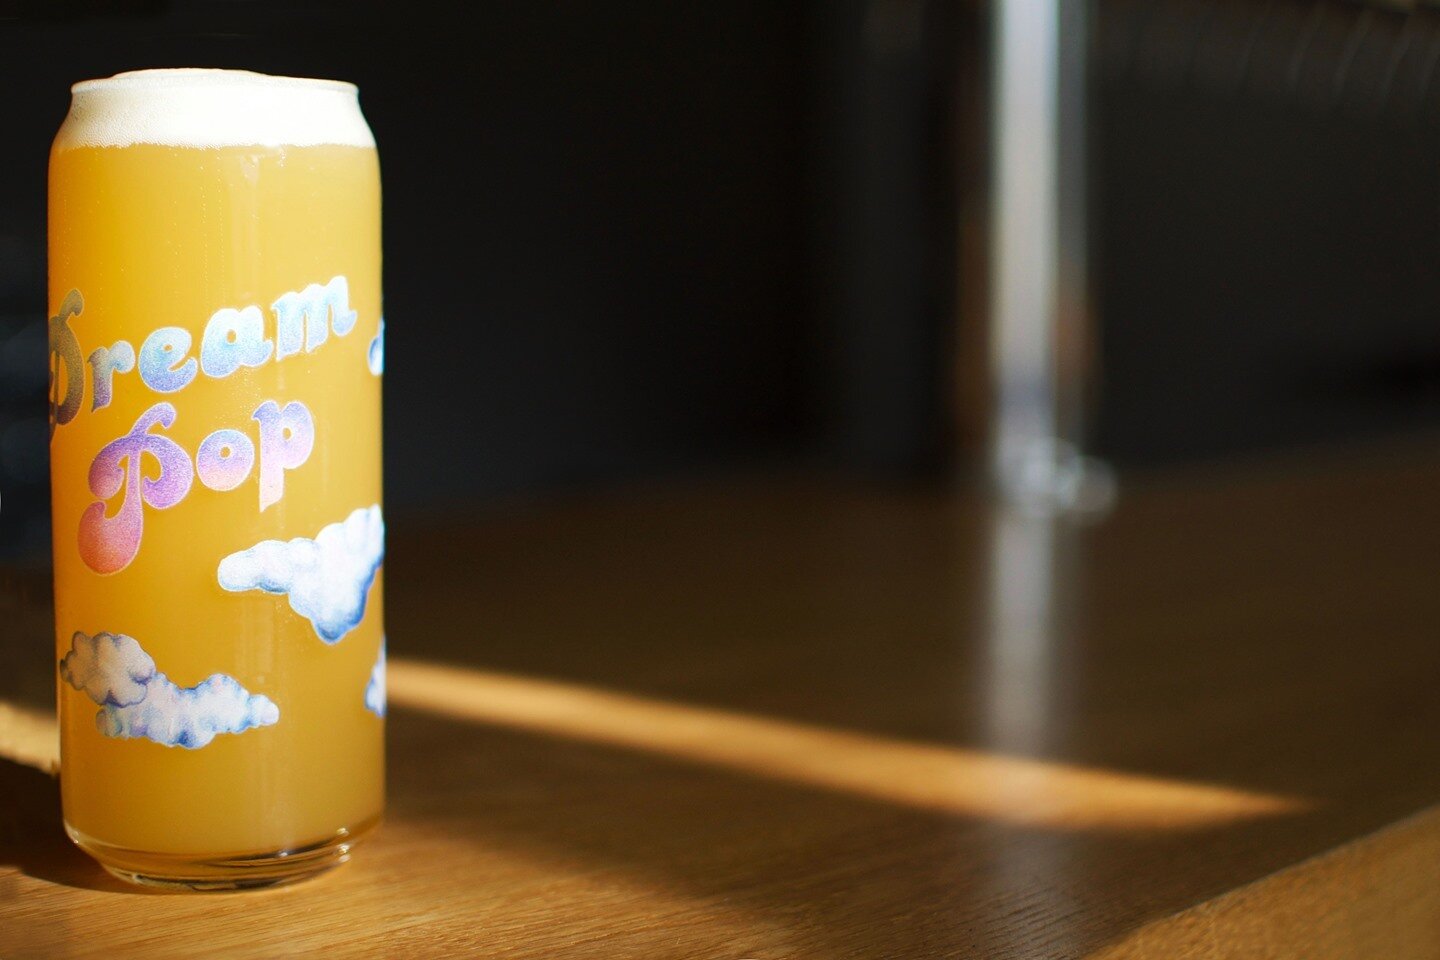 Fresh Dream Pop on tap! Come and get it - this hazy, soft oat pale ale has made a name for itself around Somerville, and we're just as excited as you are!⠀
On draft and crowlers to go.